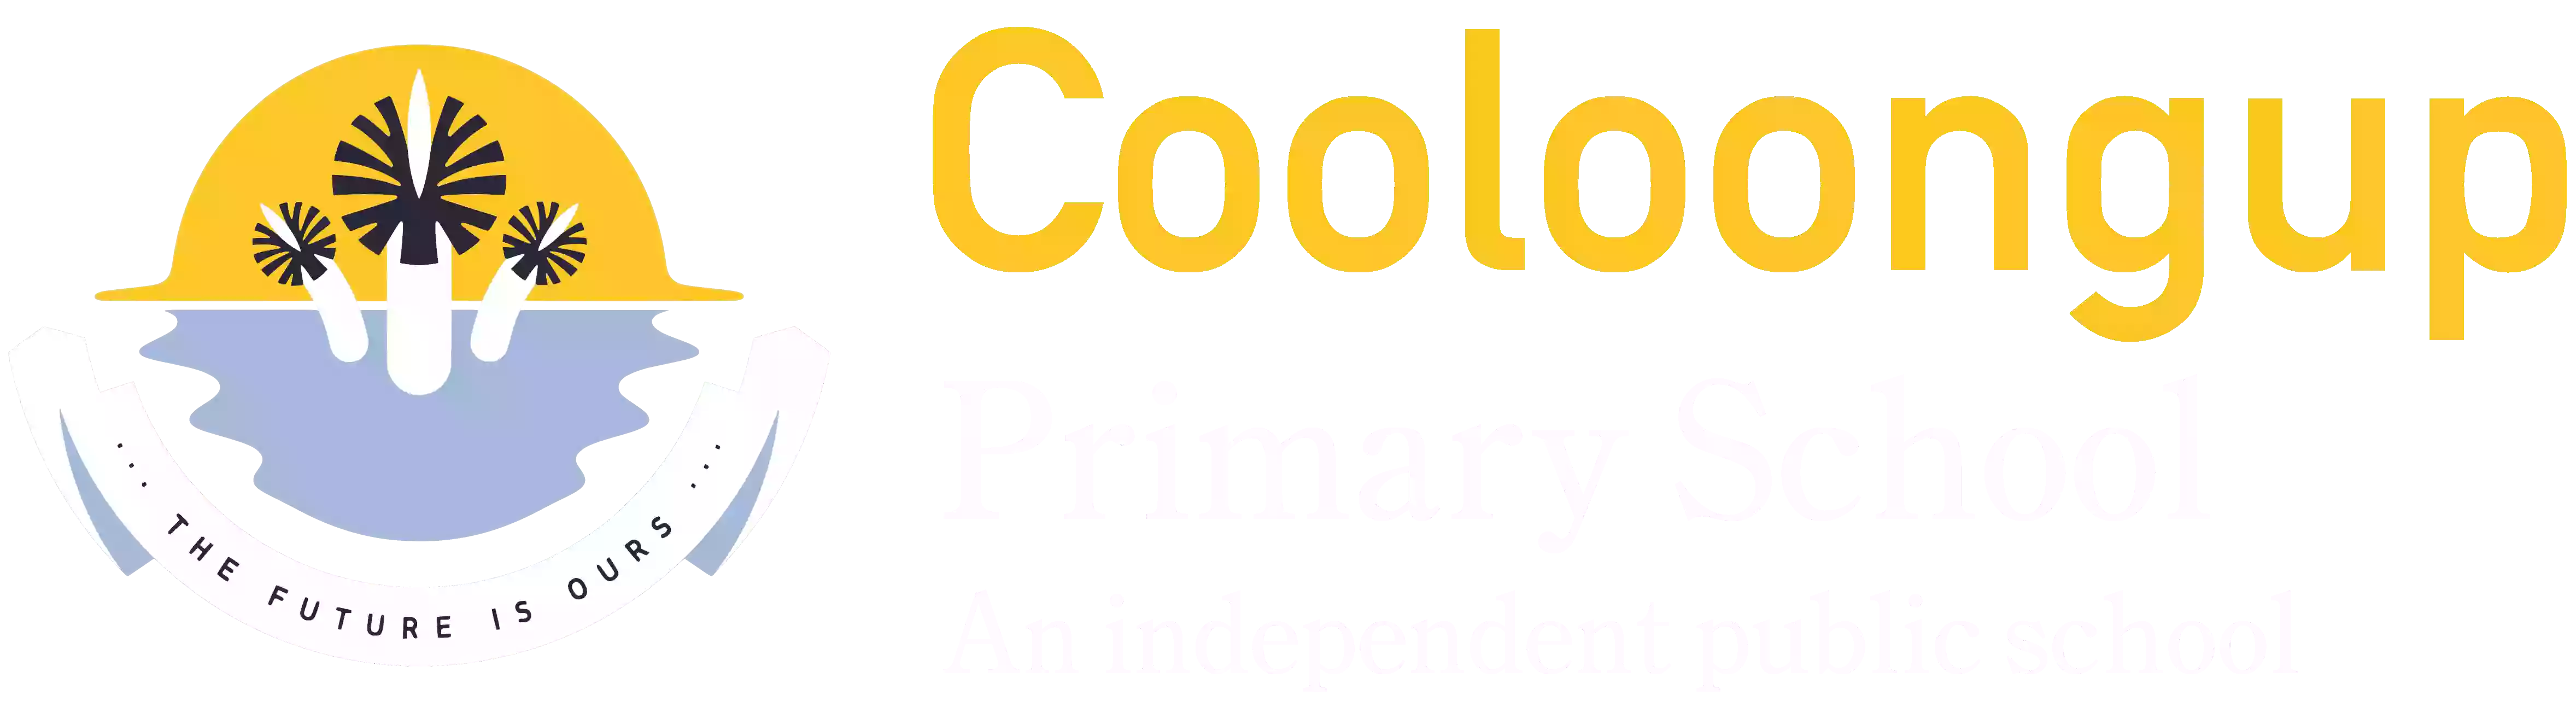 Cooloongup Primary School